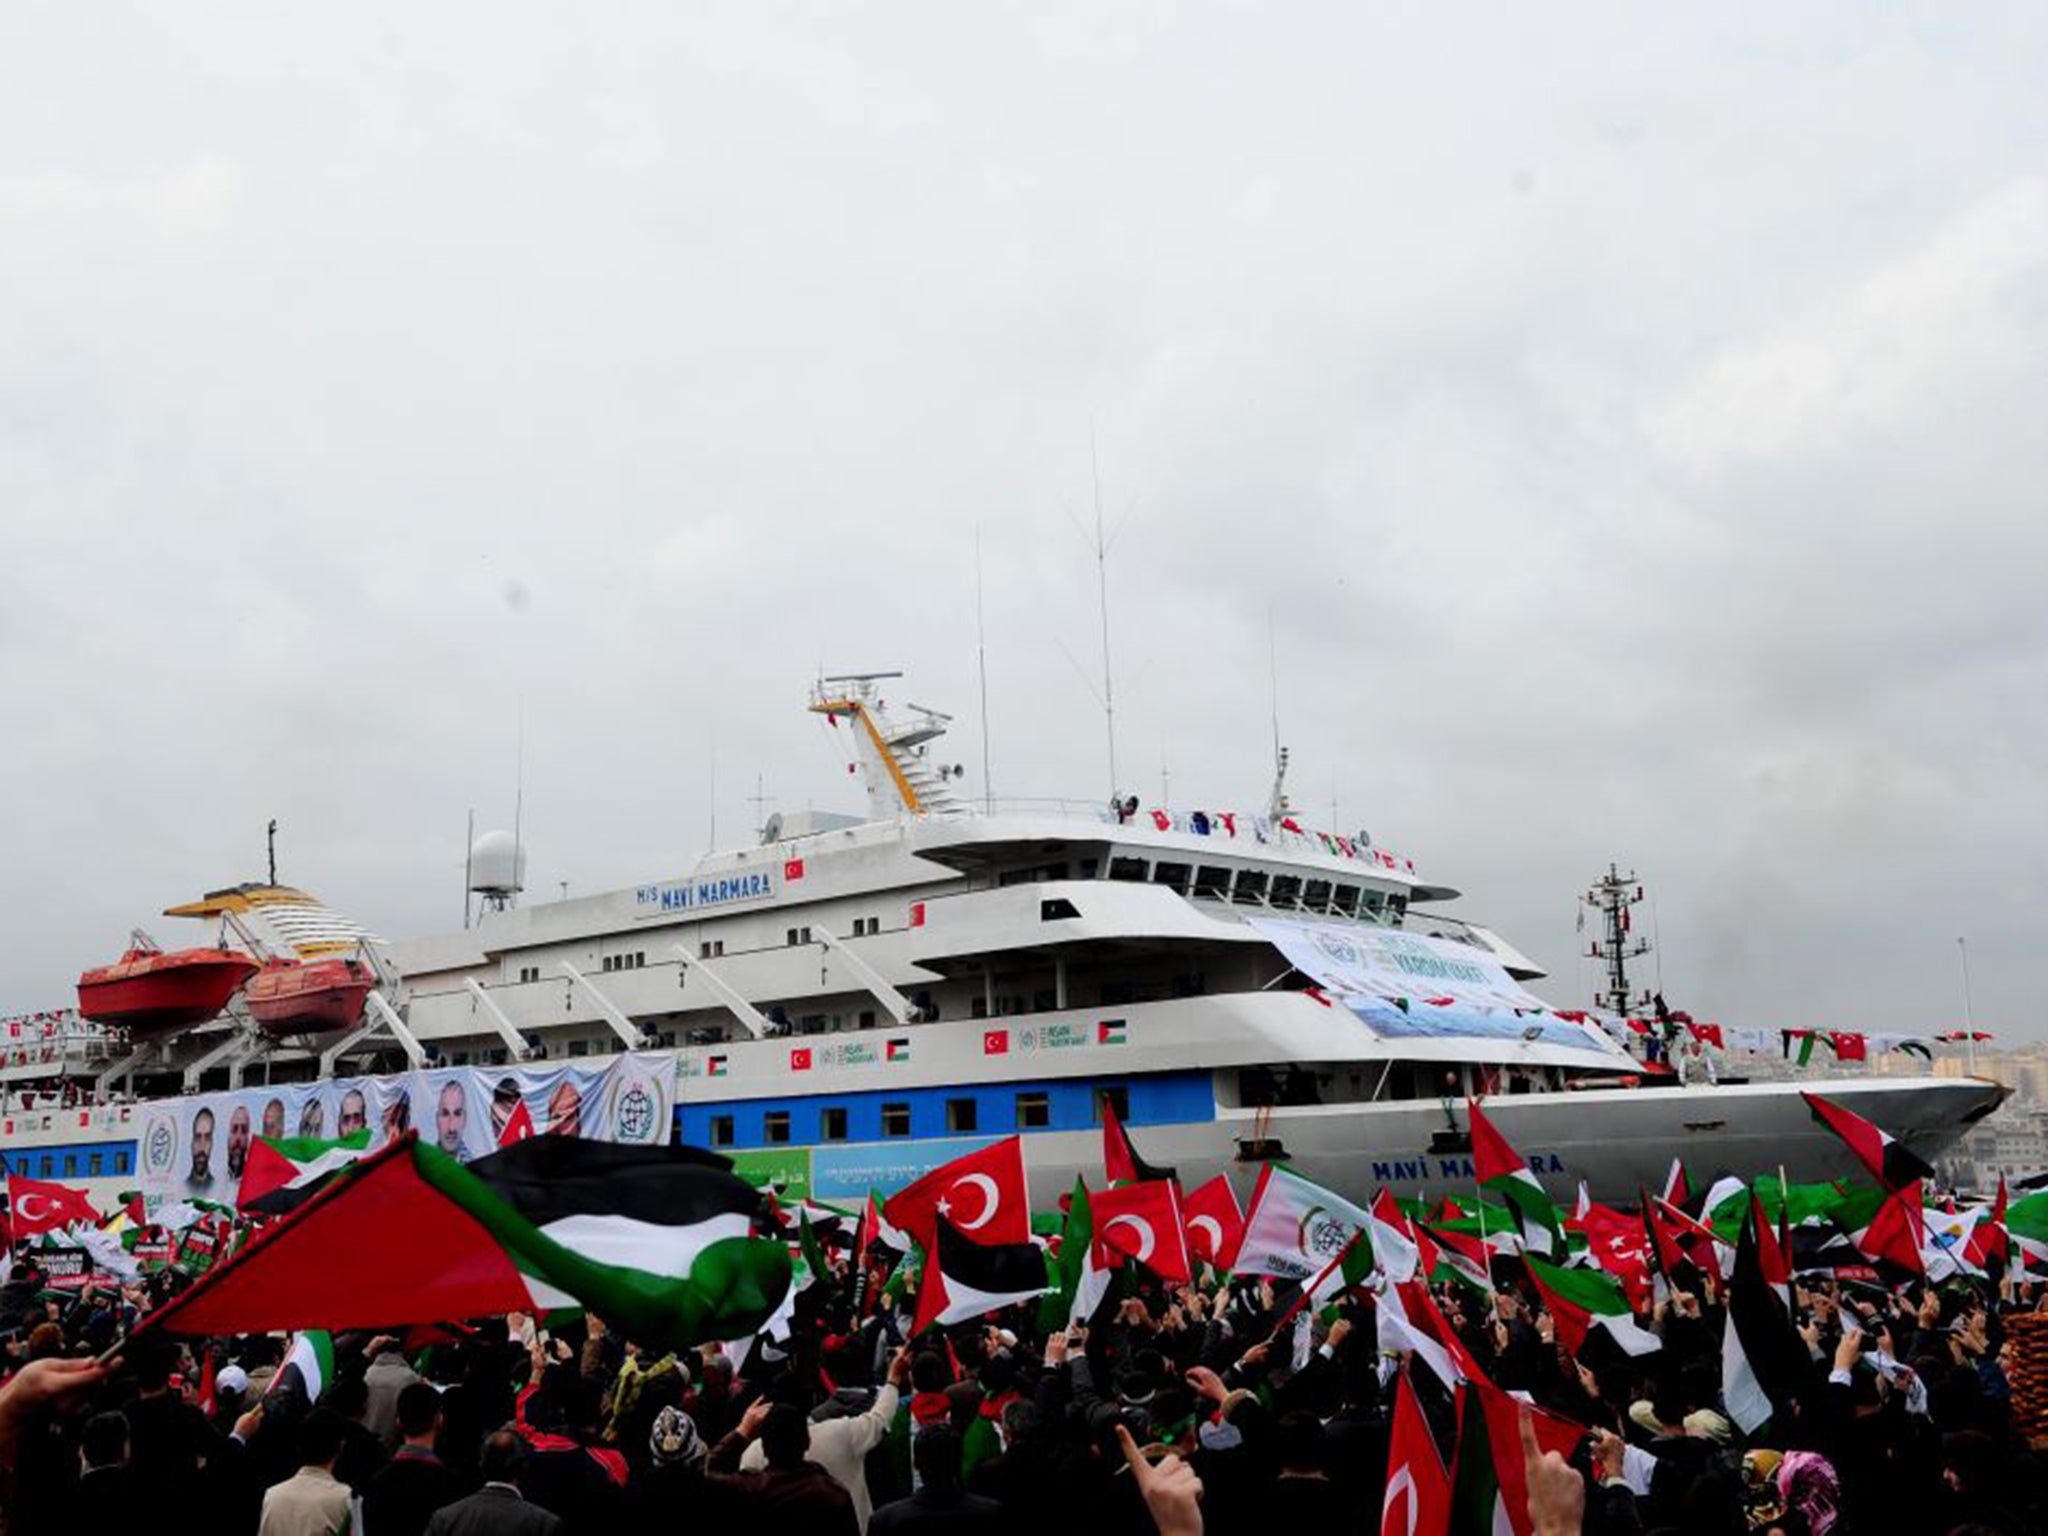 People wave Palestinian and Turkish flags as they welcome the Mavi Marmara ship at Istanbul's Sarayburnu port in 2010. The Turkish ferry was the target of a deadly raid by Israeli commandos when it tried to deliver aid to Gaza.